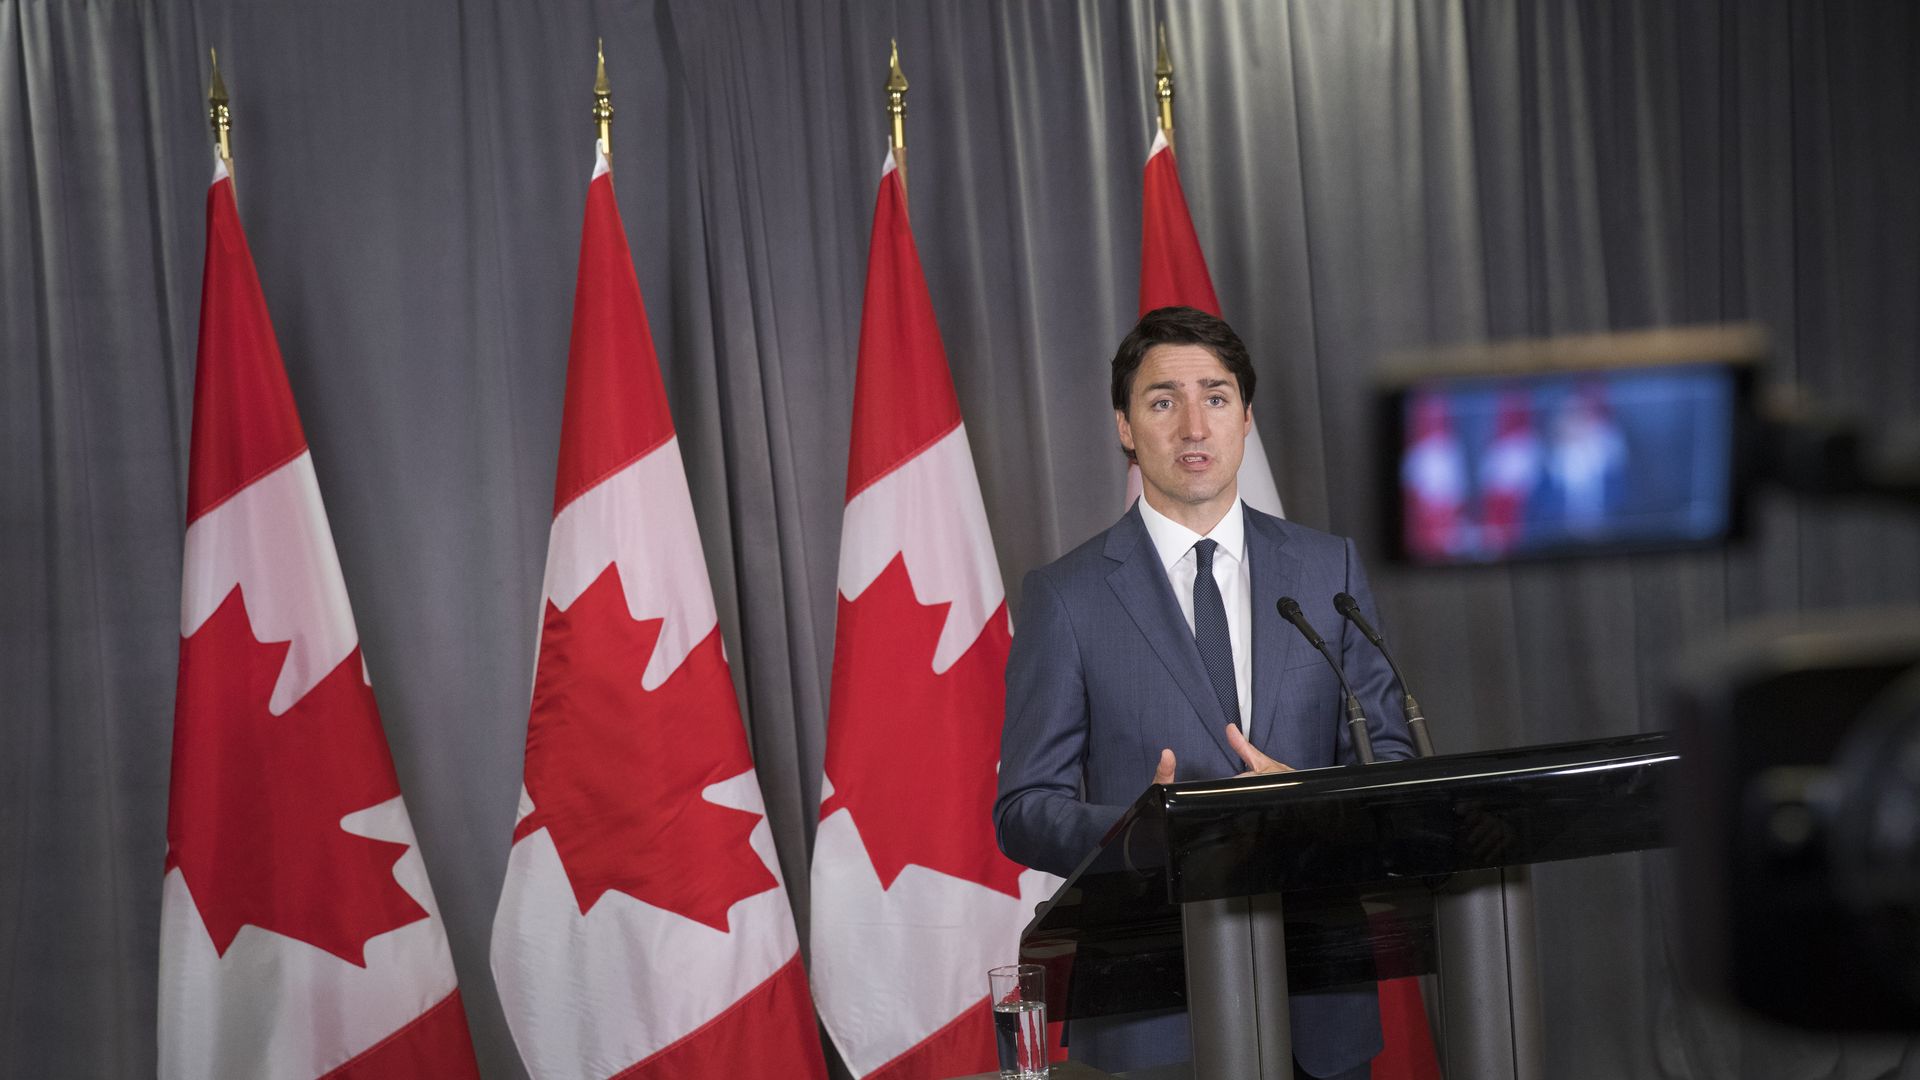 Justin Trudeau speaks at podium before four Canadian flags.